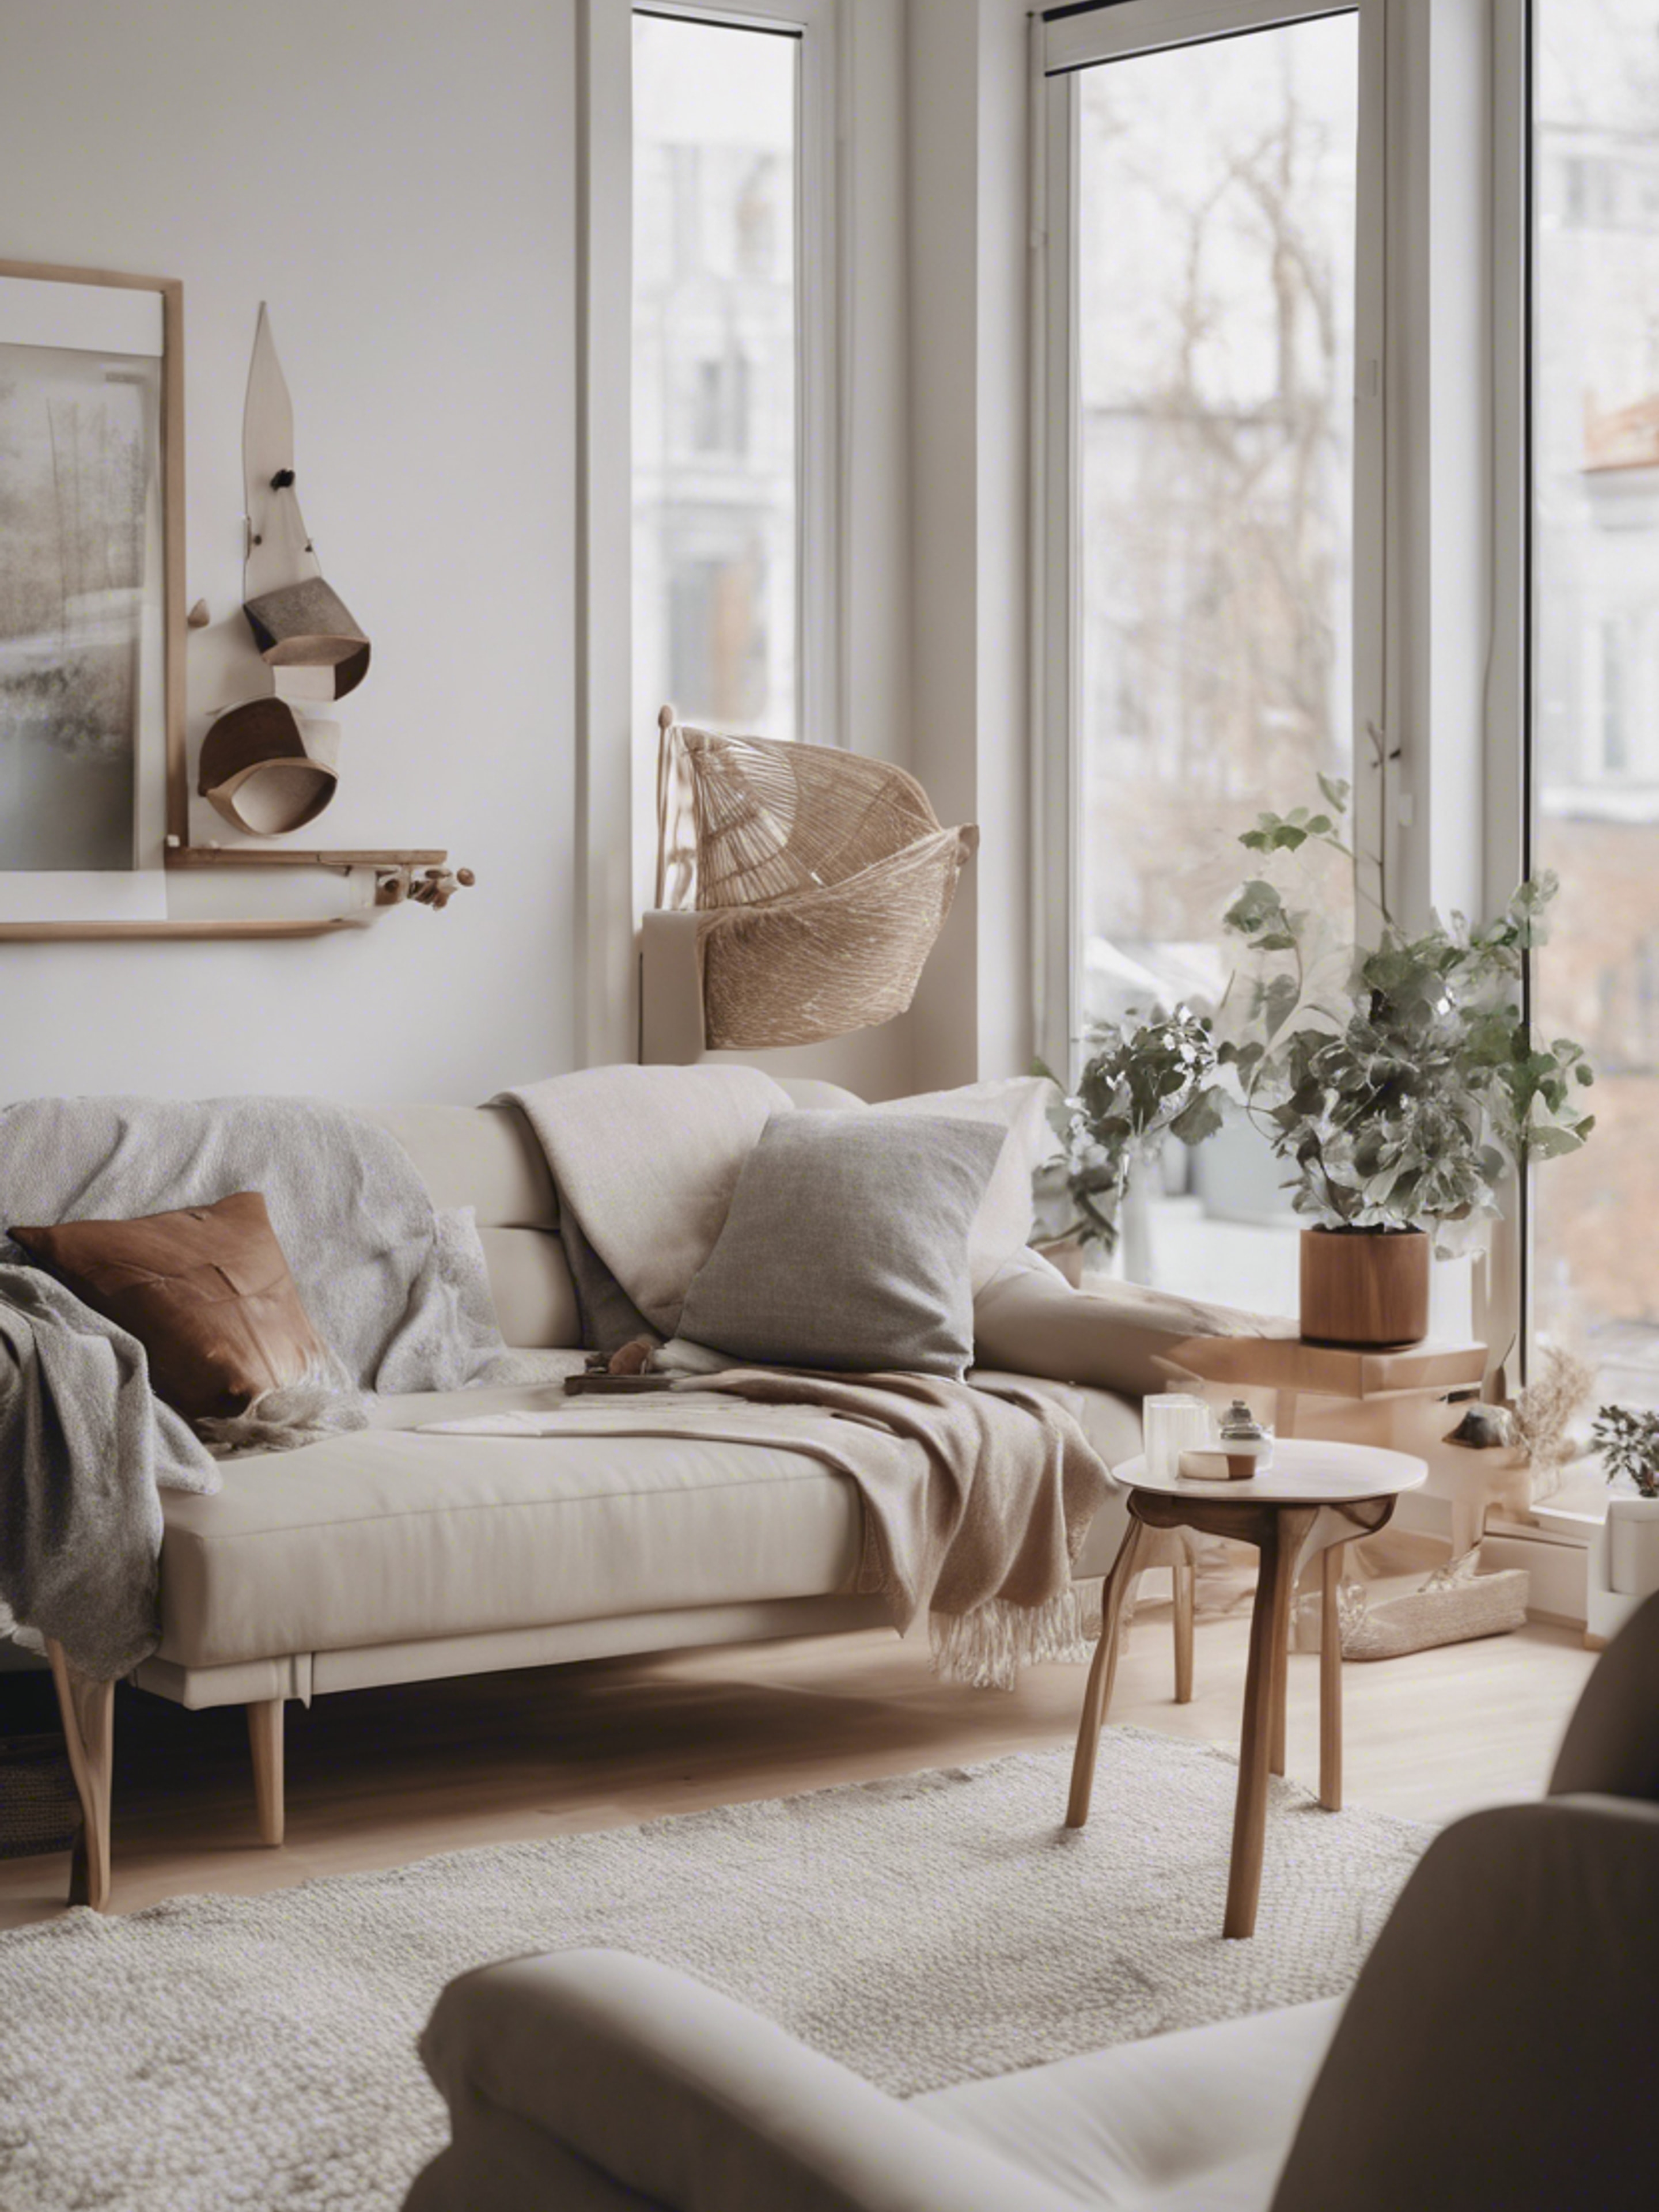 A Nordic-styled apartment with minimalist design, neutral color palette, and cozy accents. Шпалери[7cbaae500de44ae0bb2d]